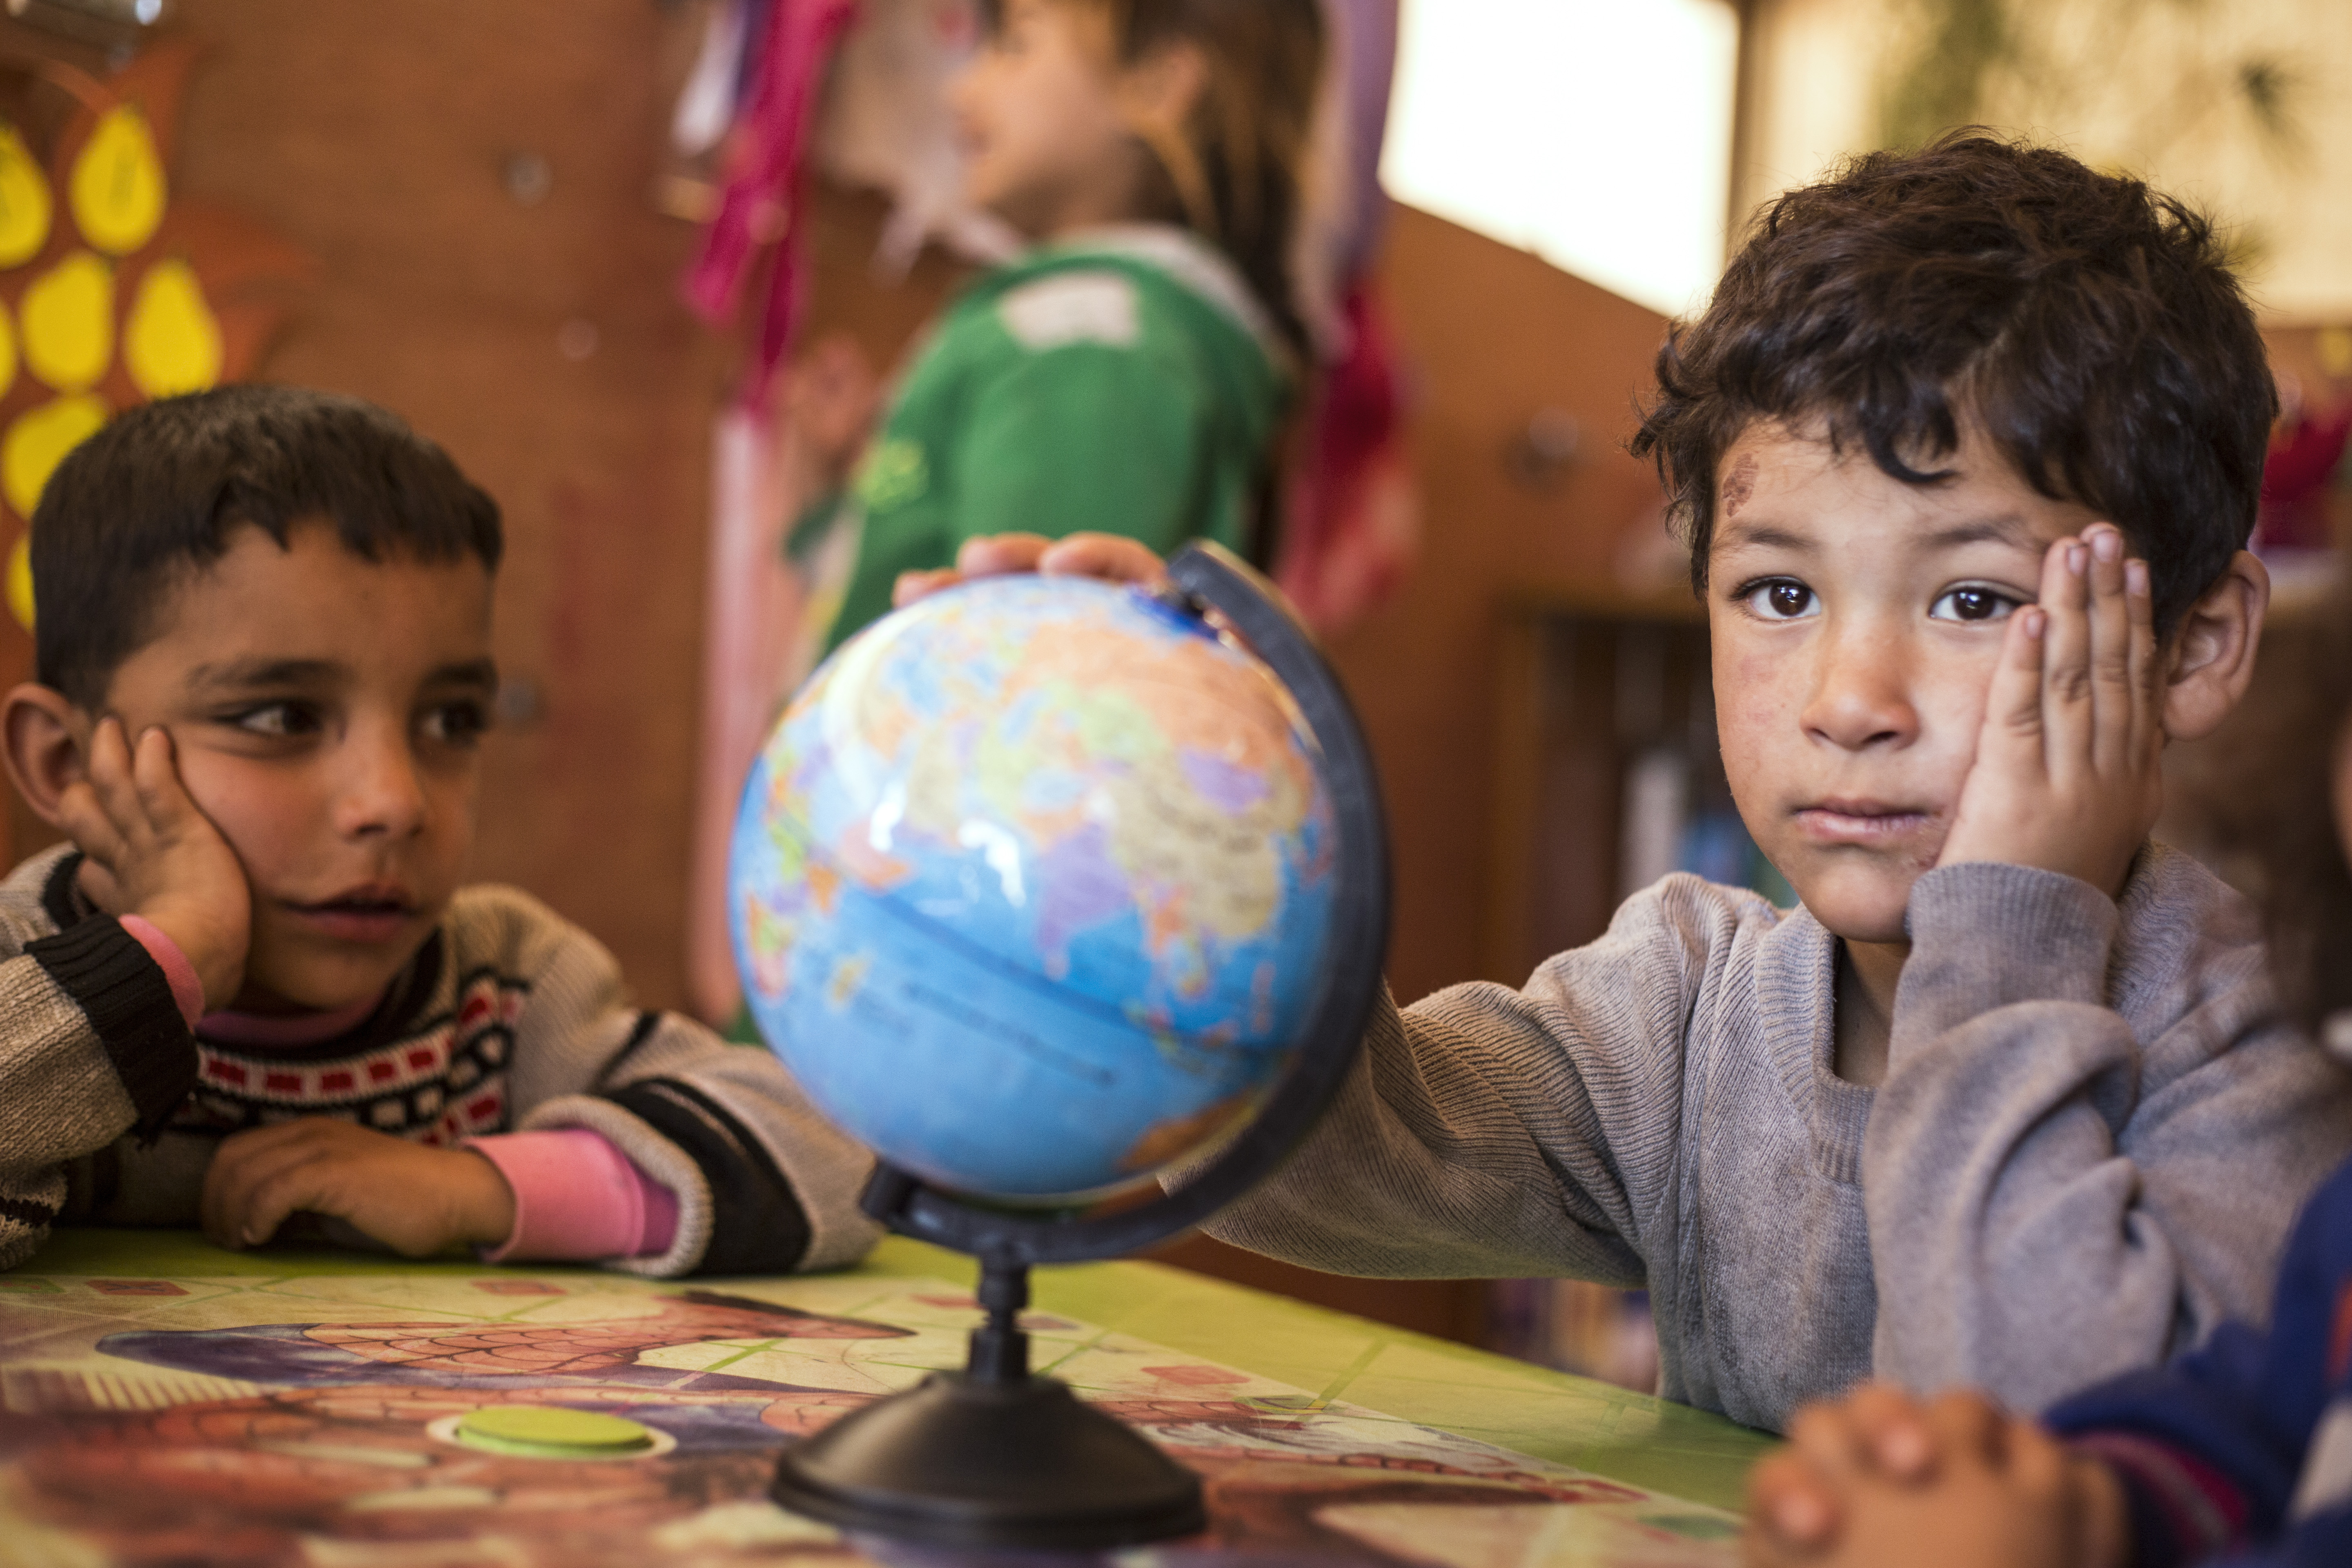 Mahmoud (right) is a five-year-old Syrian boy from Al-Raqqa.